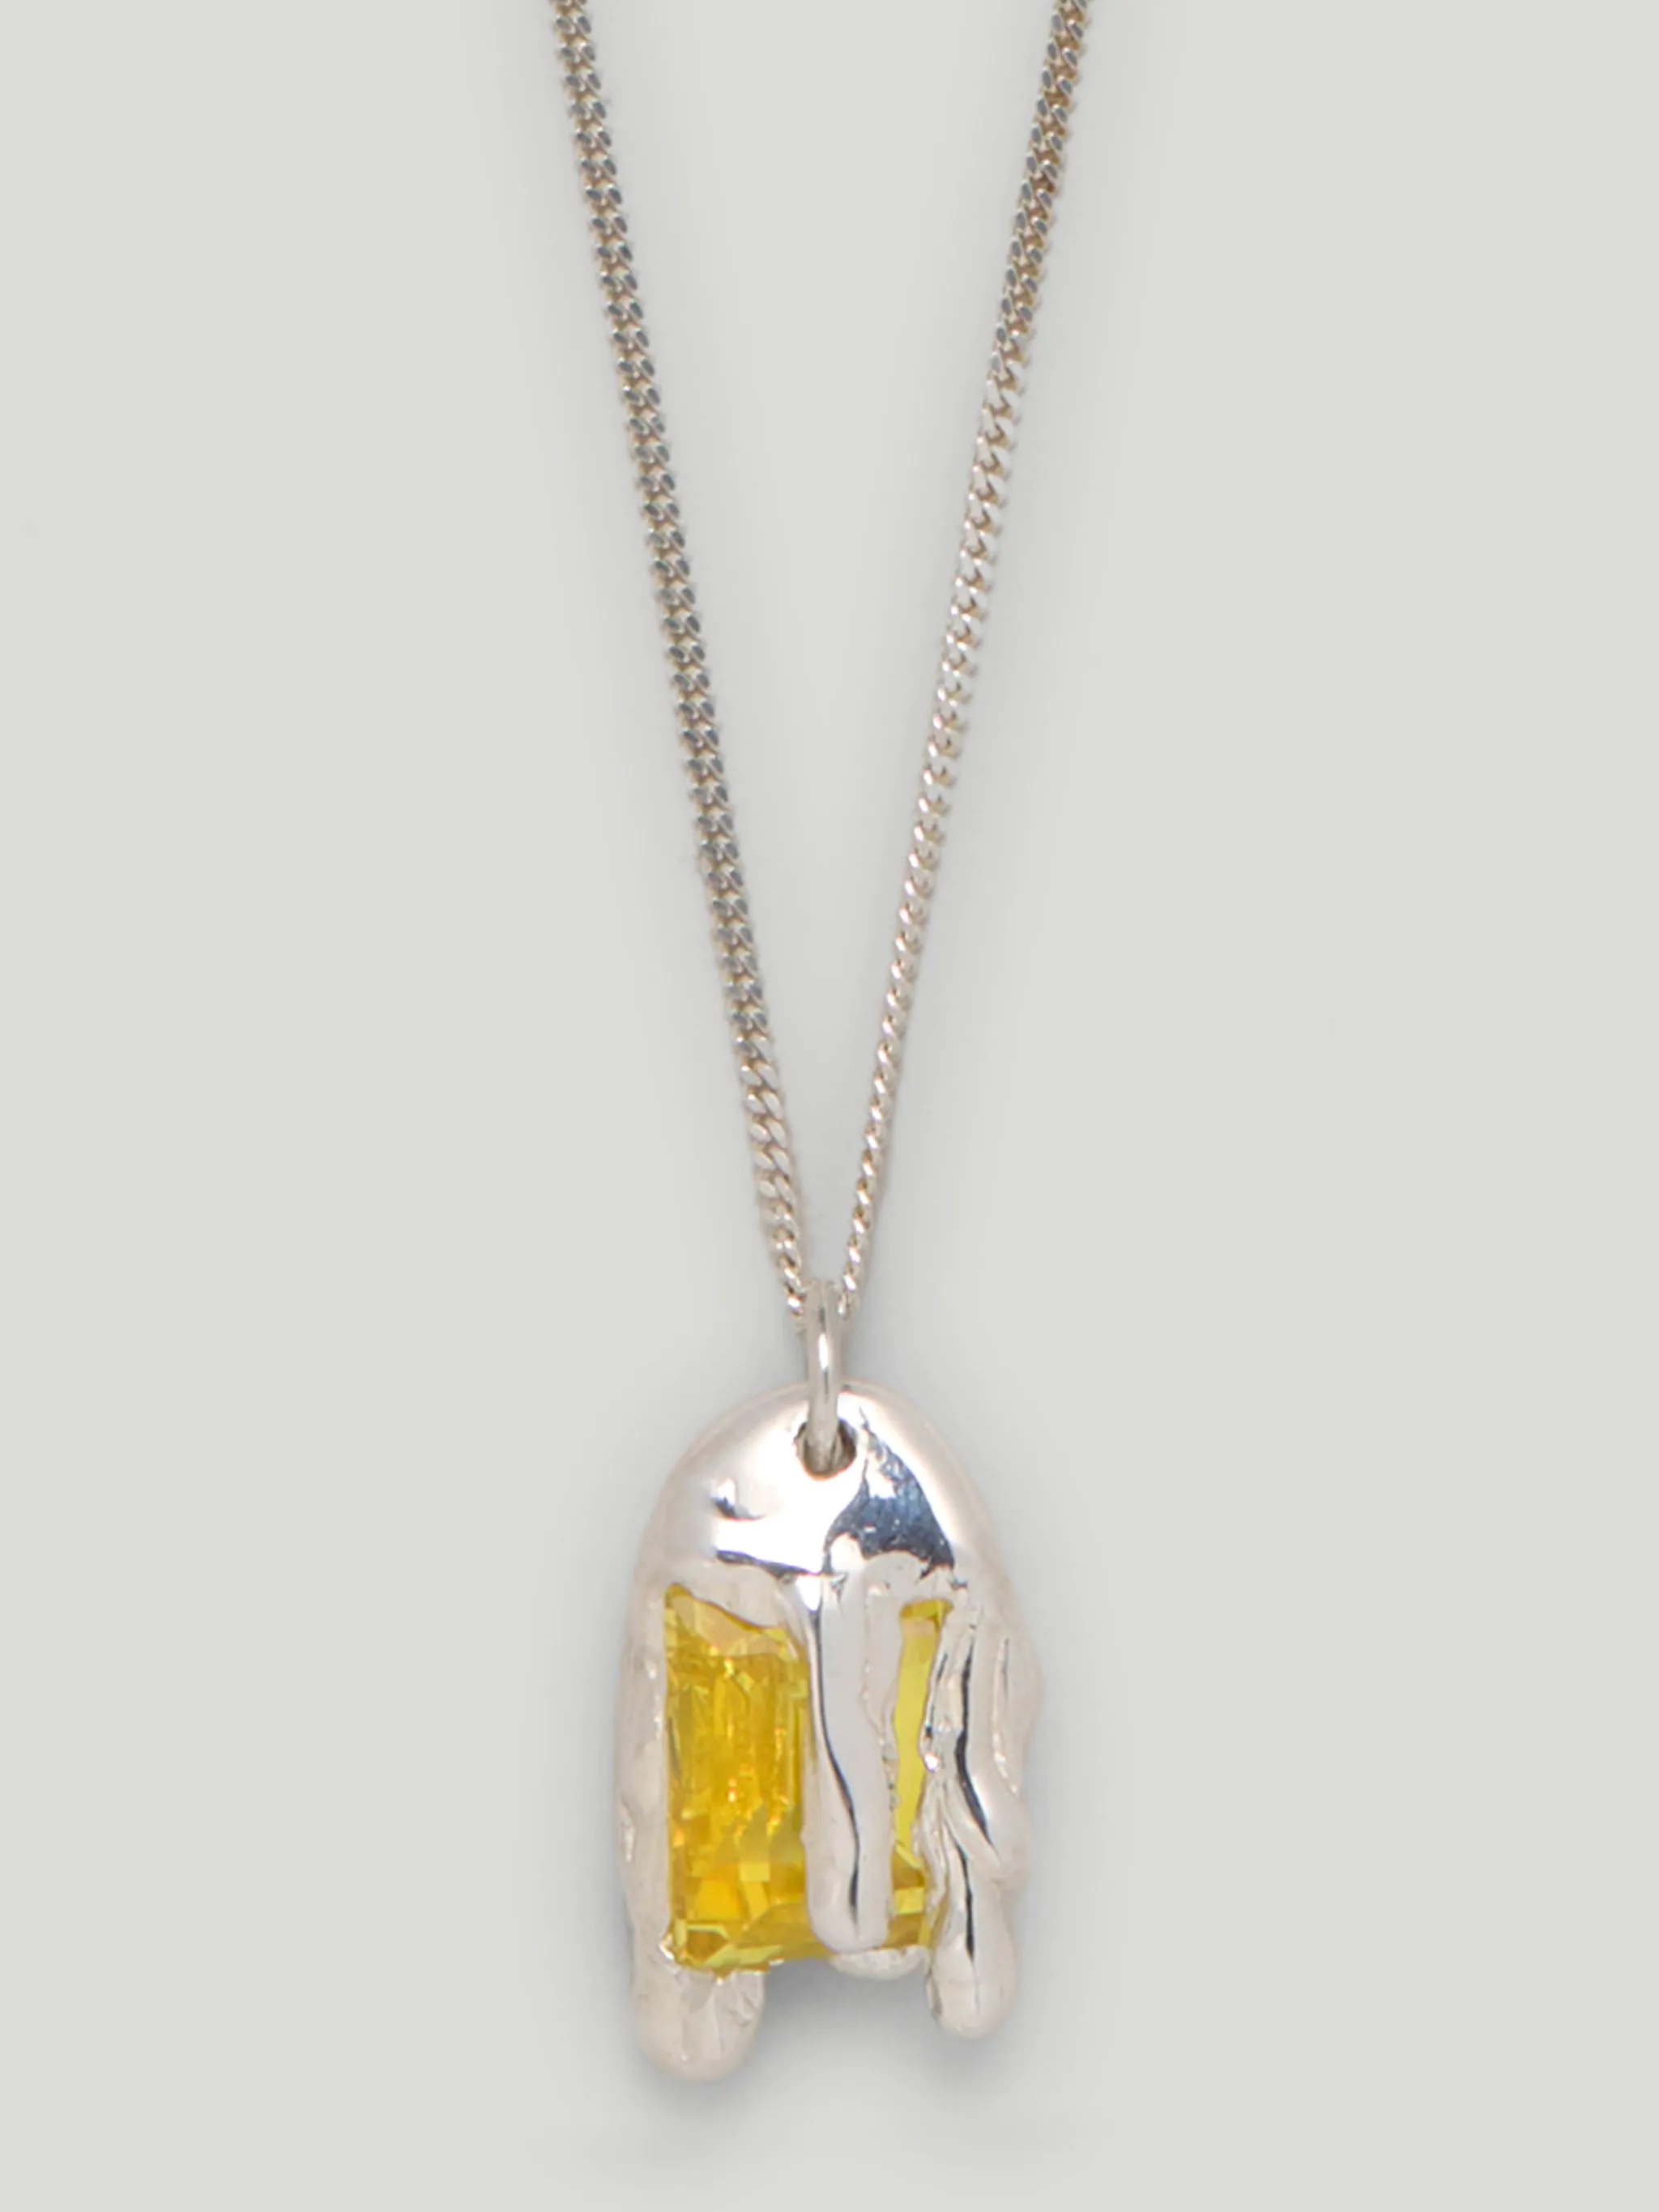 MELTING WAX YELLOW CHARM NECKLACE - 1